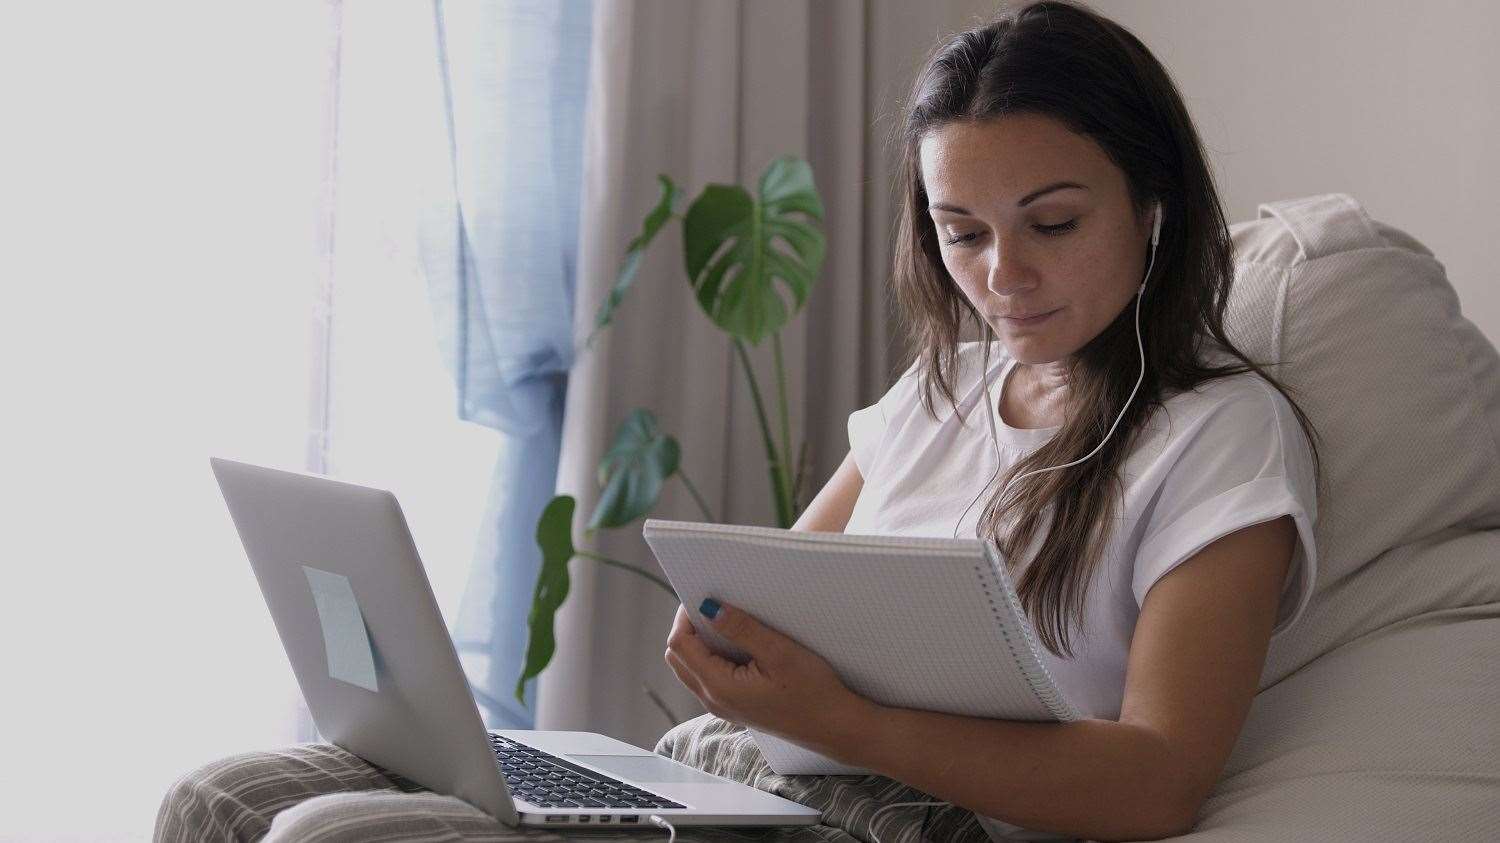 Those who can do so are being asked to go back to working at home. Photo: Shutterstock